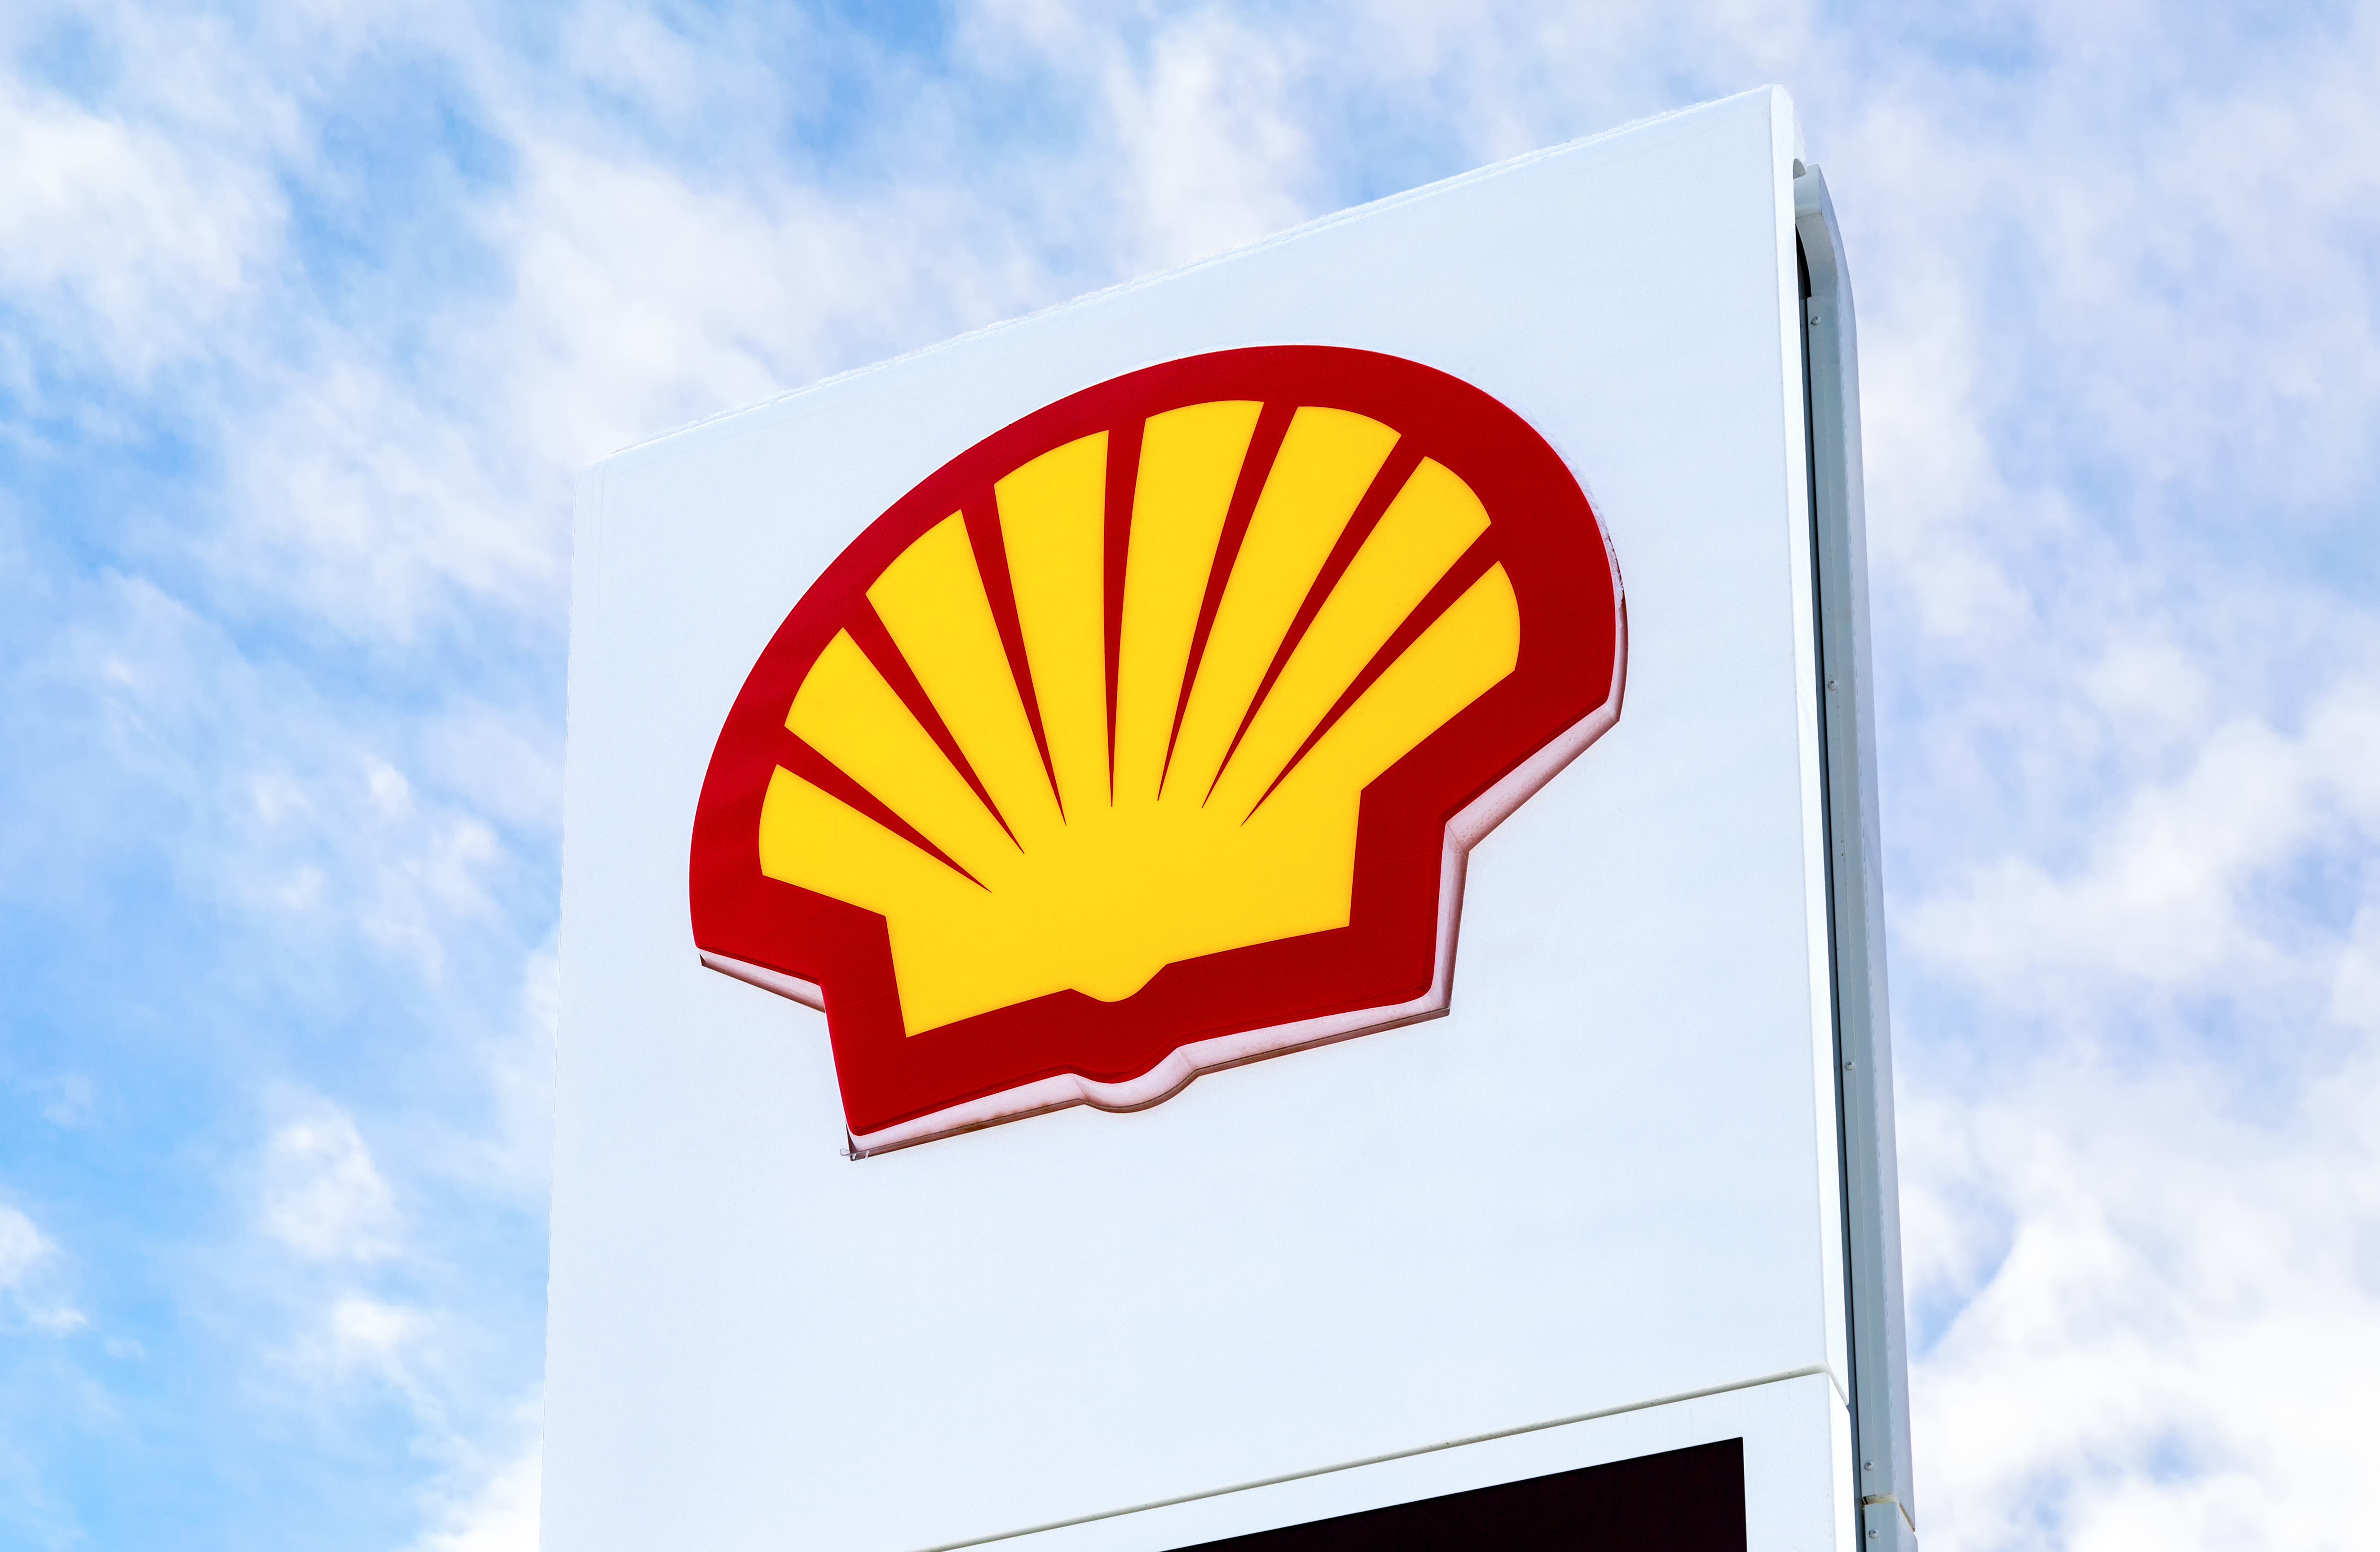 Octopus Energy Completes Purchase of Shell Energy Retail in UK and Germany